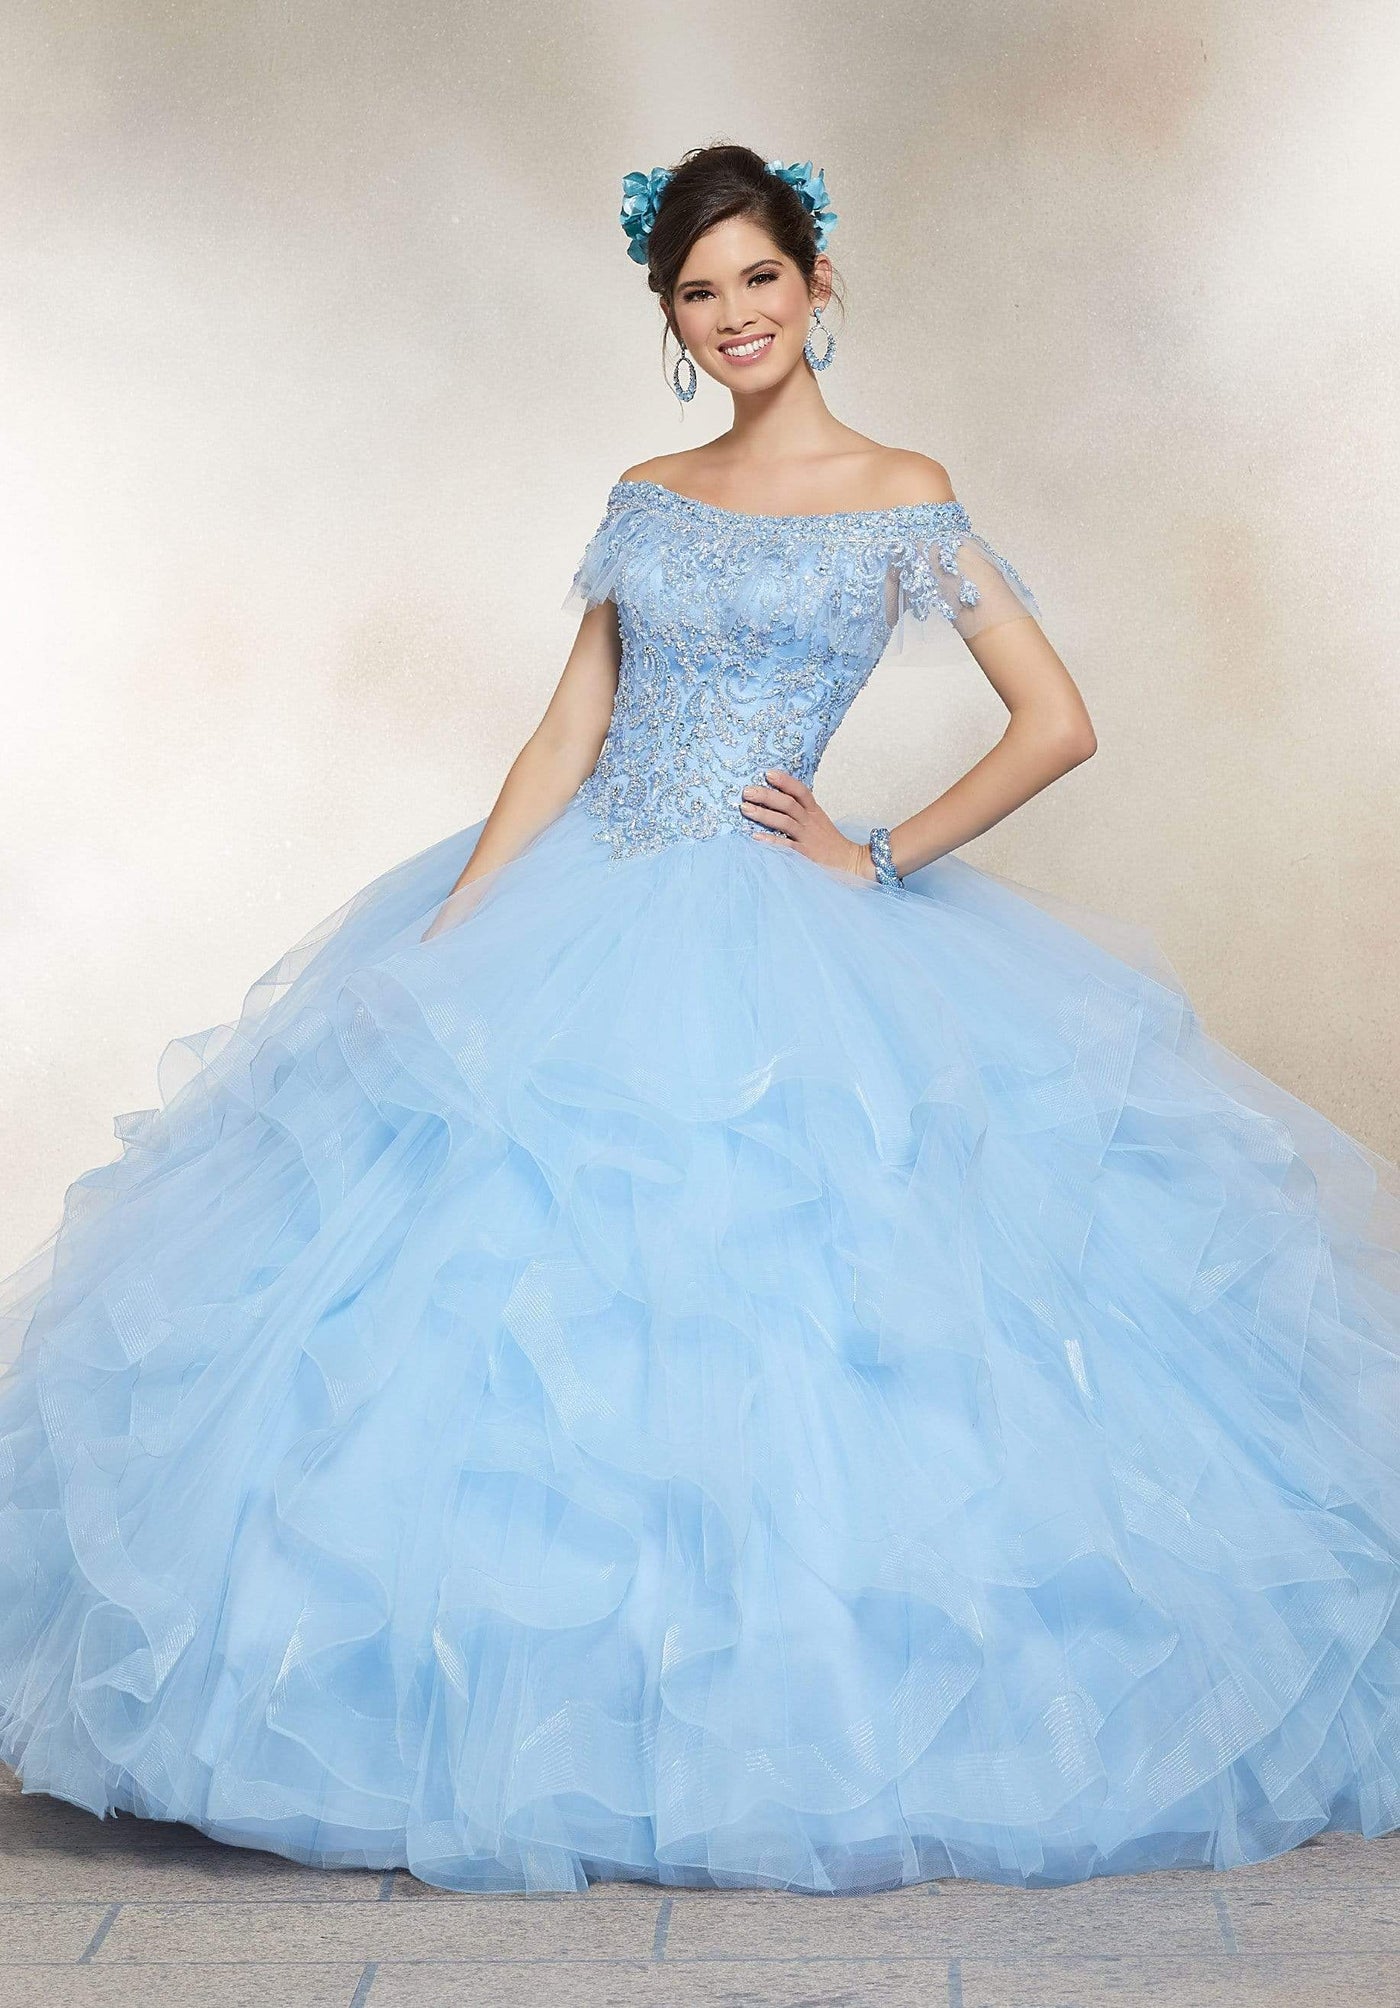 Vizcaya by Mori Lee - 89237 Off Shoulder Flounced Tulle Ballgown Quinceanera Dresses 0 / Bahama Blue